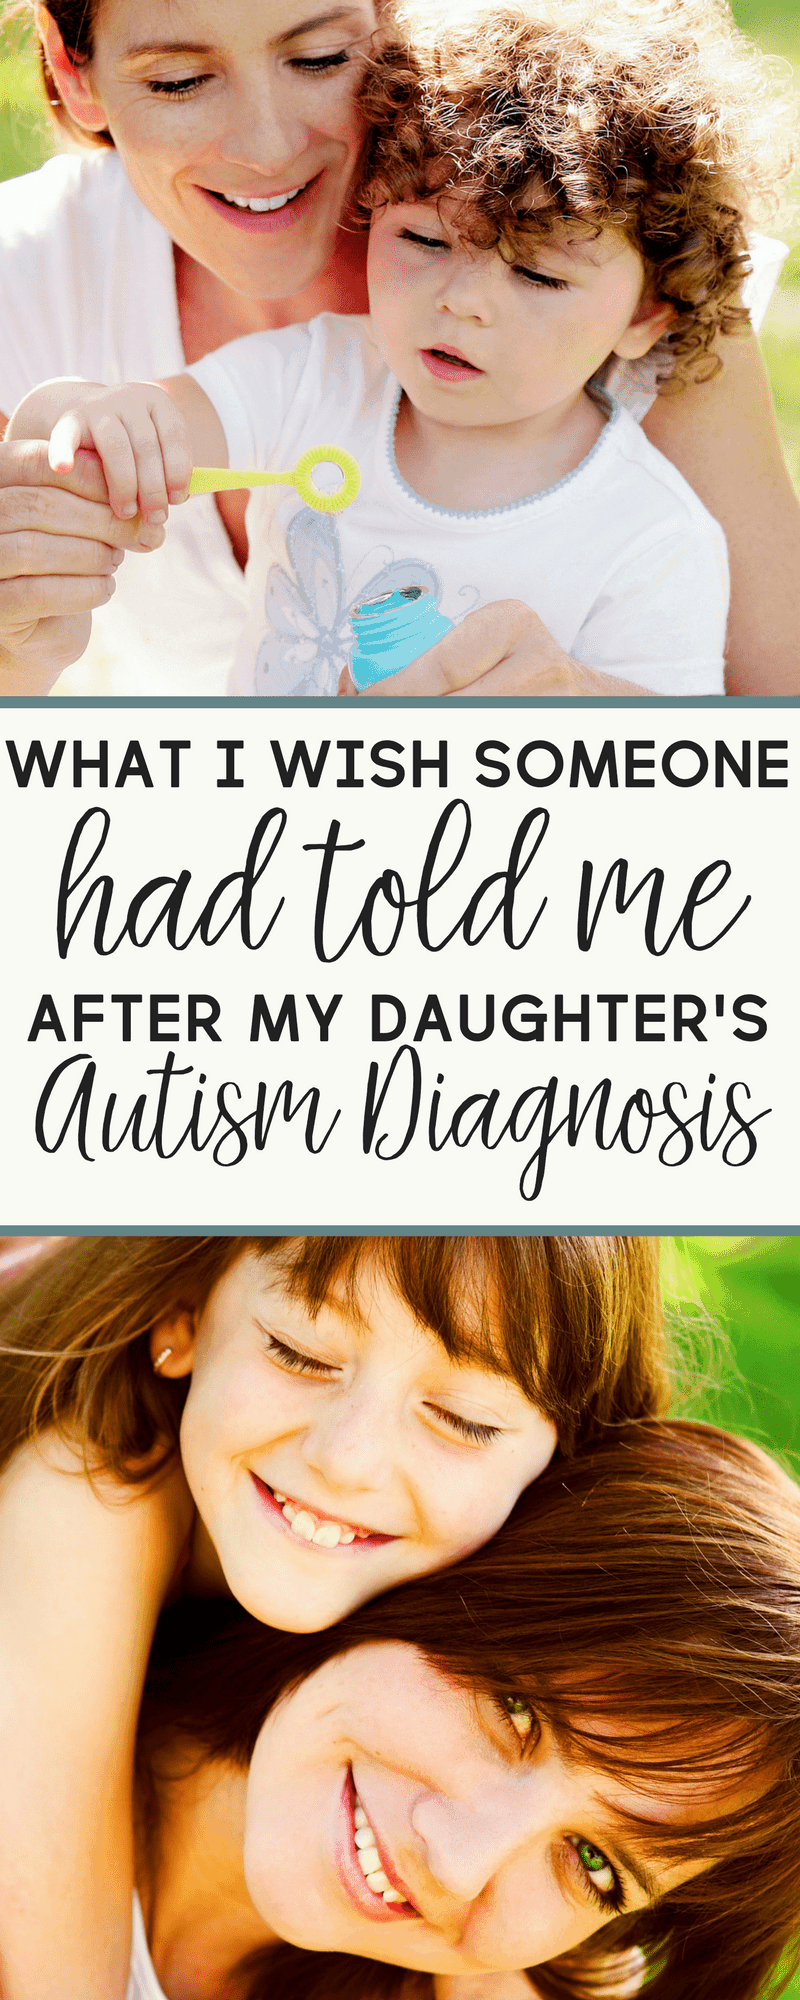 After my daughter received her autism diagnosis, there were so many things I wish I had done differently. Here's one piece of advice that I wish I could have told myself back then.